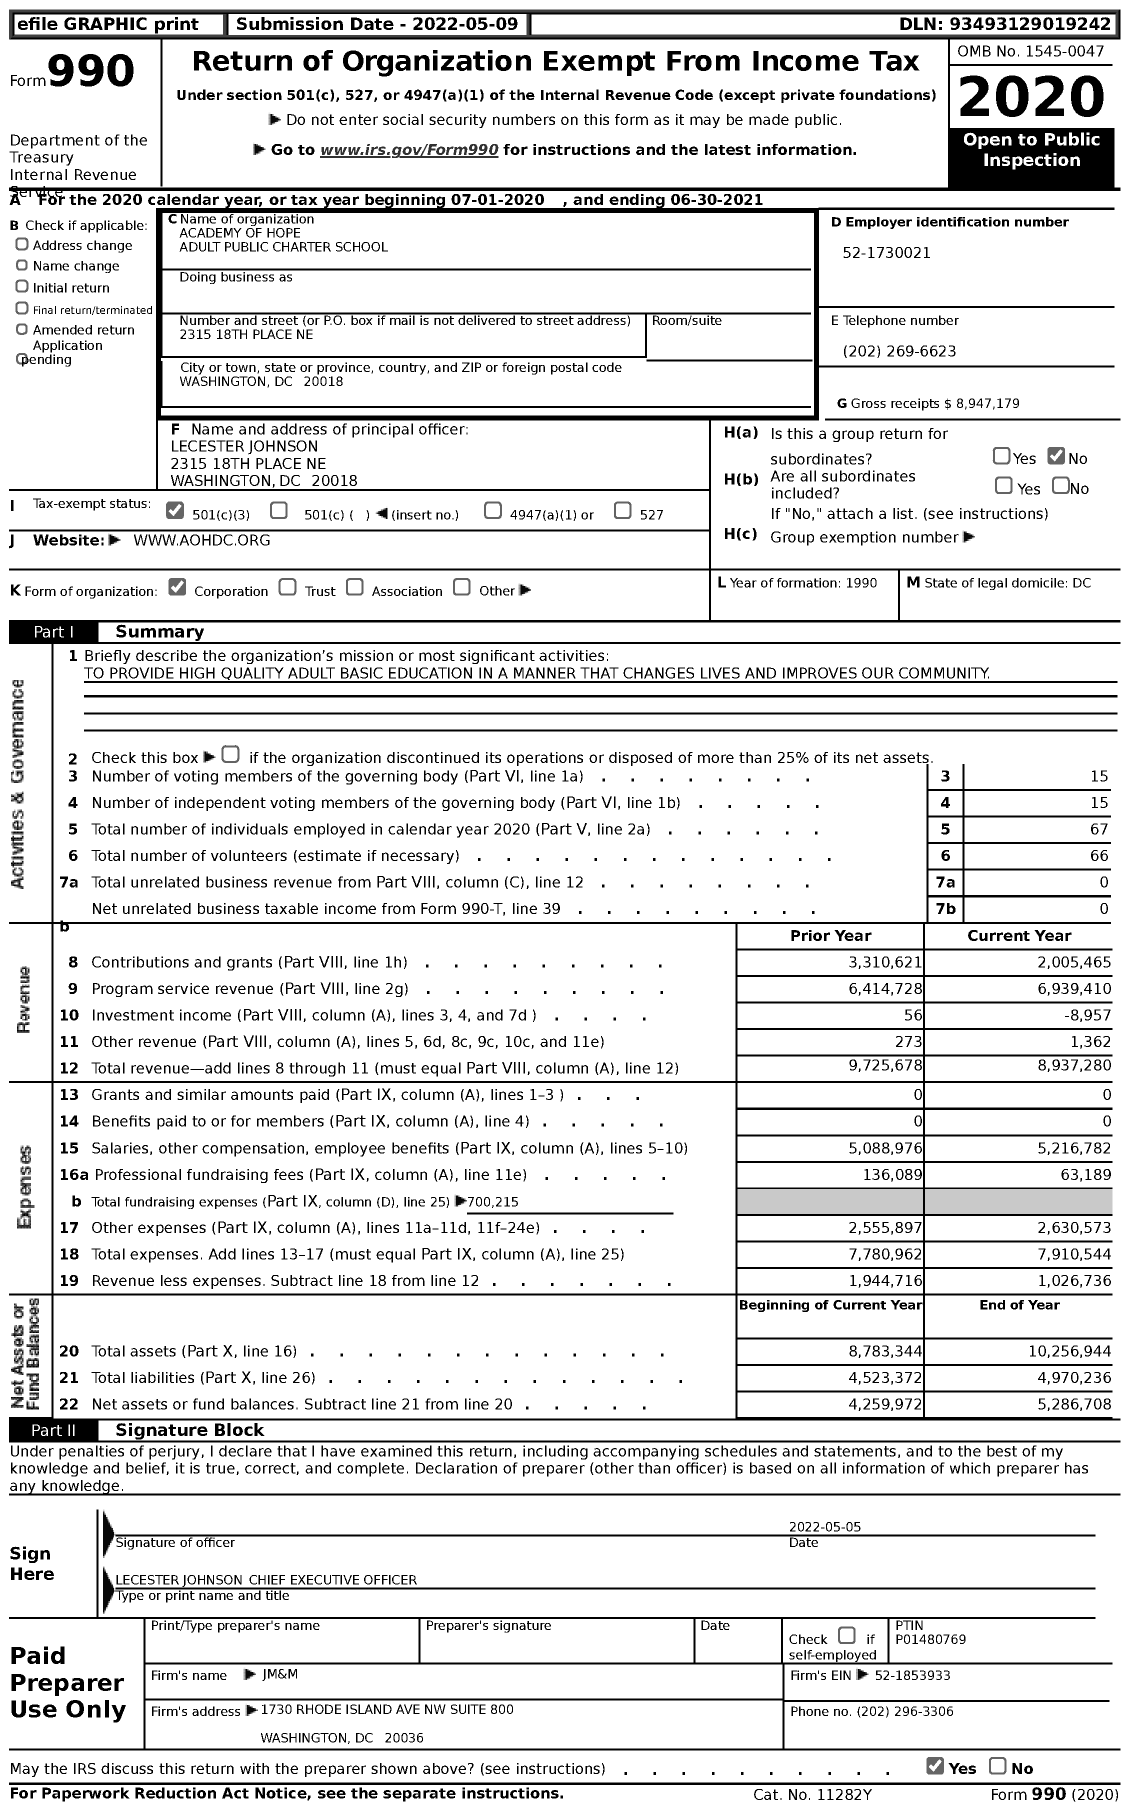 Image of first page of 2020 Form 990 for Academy of Hope Adult Public Charter School